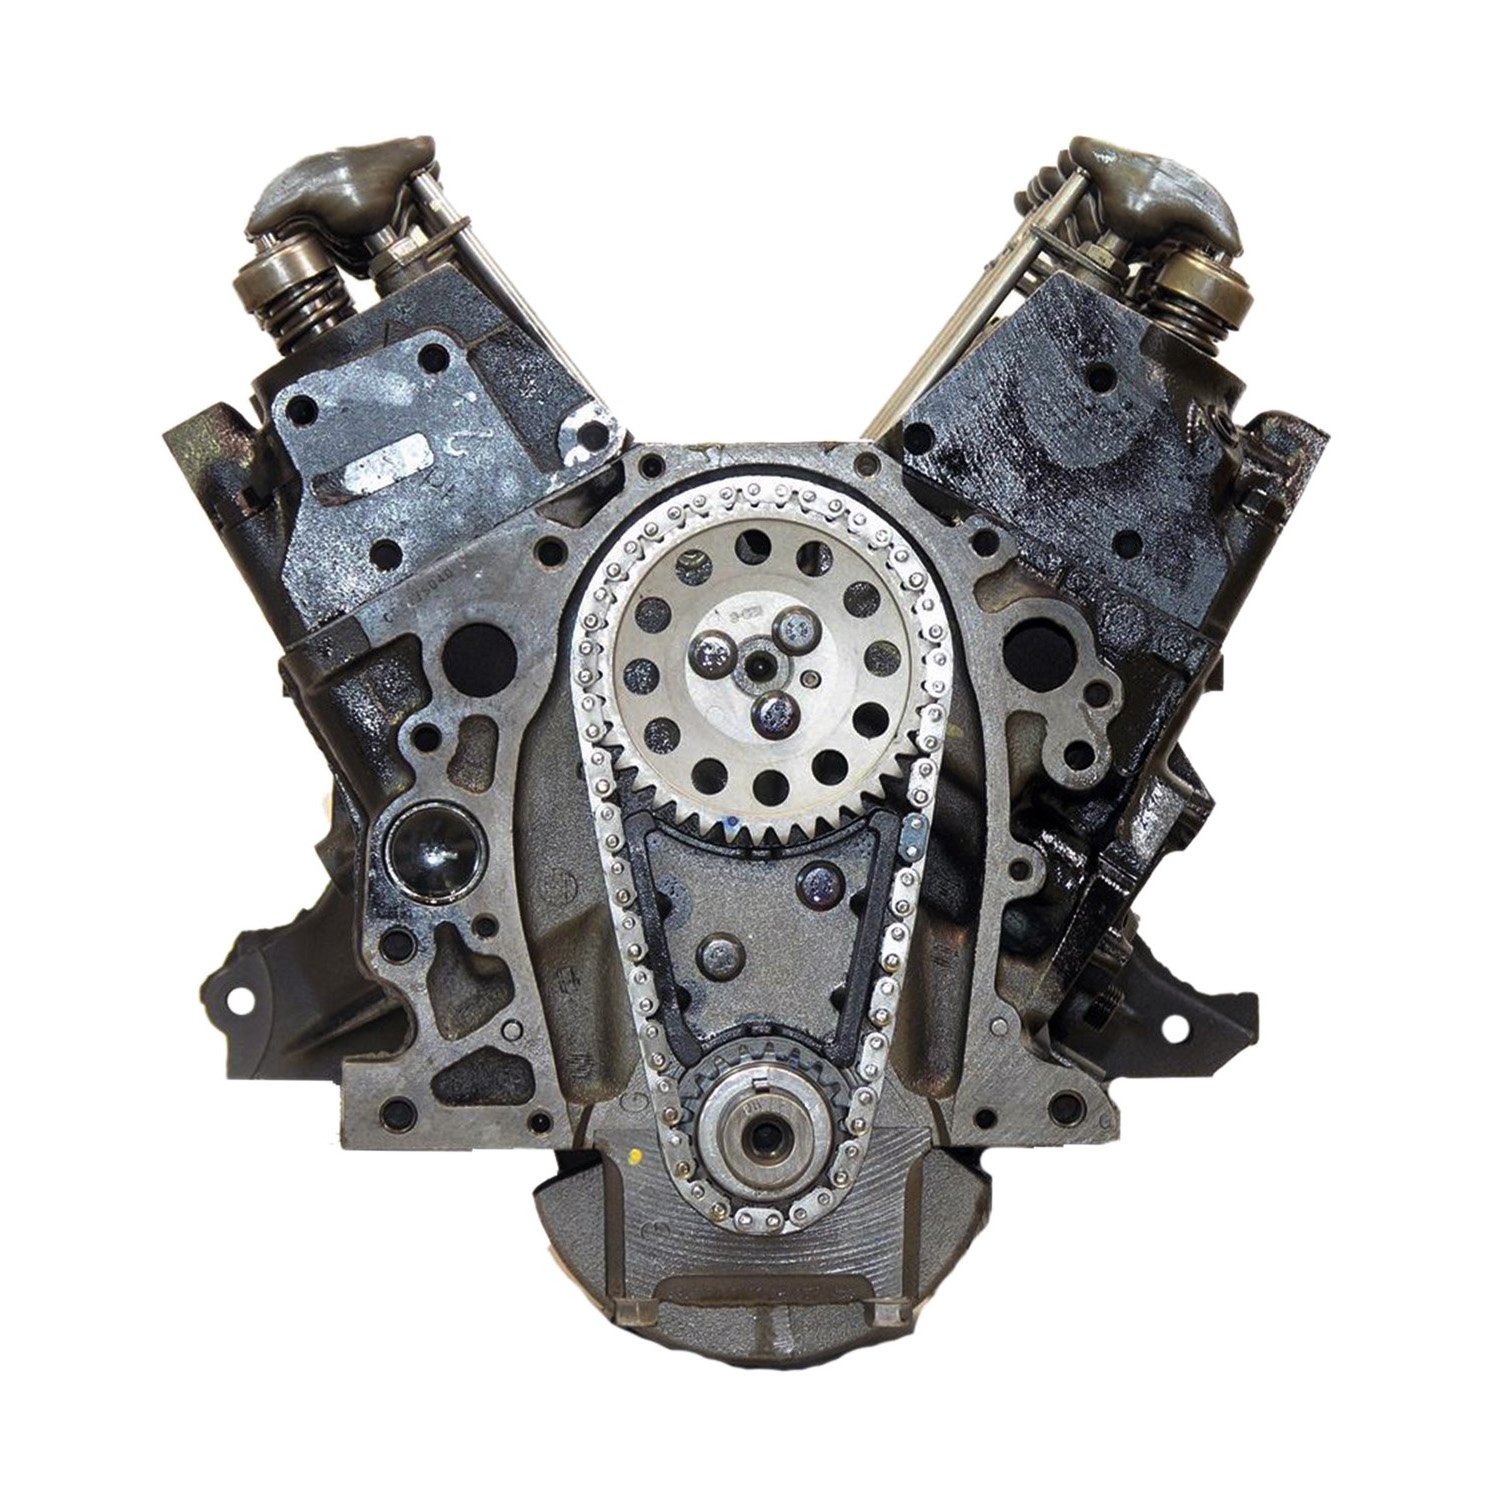 Remanufactured Crate Engine for 1988-1993 F-Body & Chevy